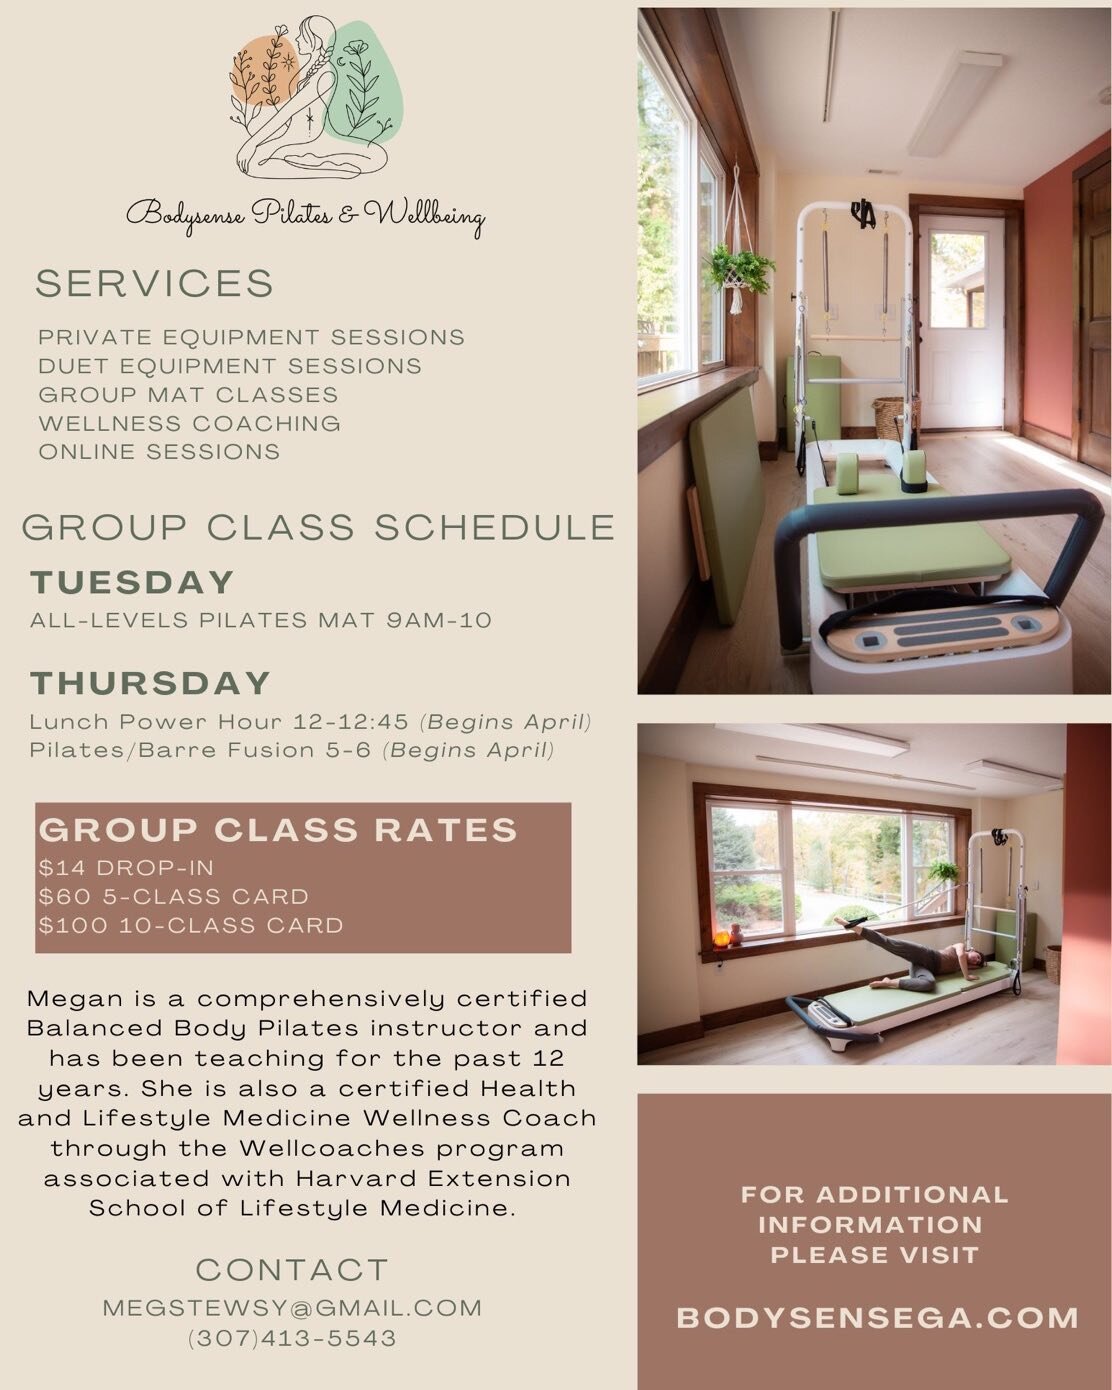 Updated class schedule, packages and services at Bodysense Pilates and Wellbeing located at Olive Tree in Blairsville,GA! New classes starting in April! Check out https://olivetreeplace.org/ for more of our offerings and holistic practices and my web